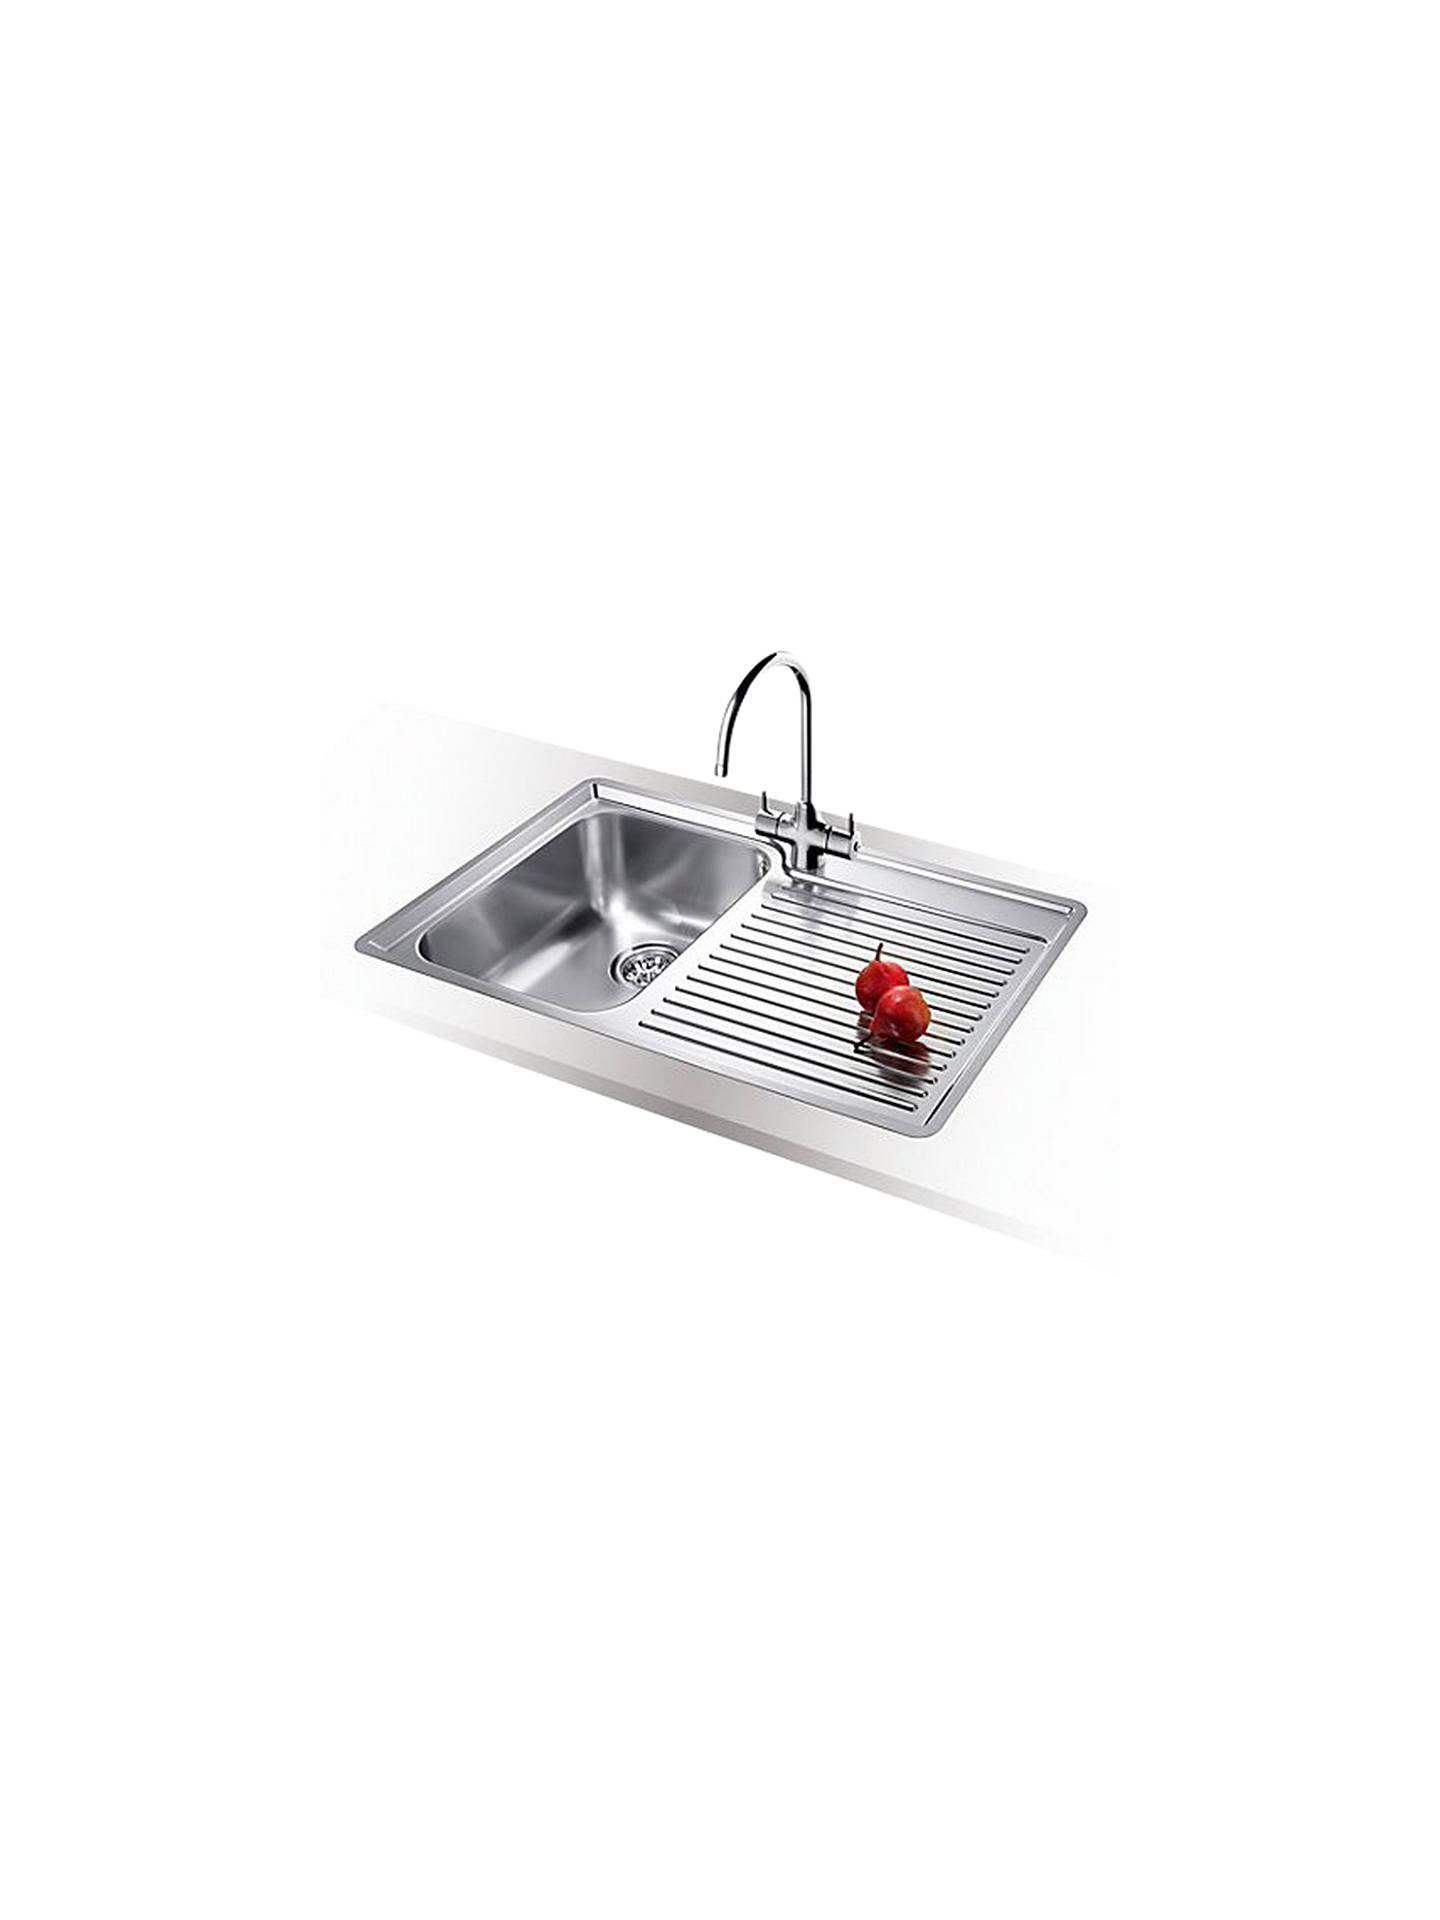 Blanco Classic 45 S 1.5 Kitchen Sink with Arch Tap, Left Hand Bowl at